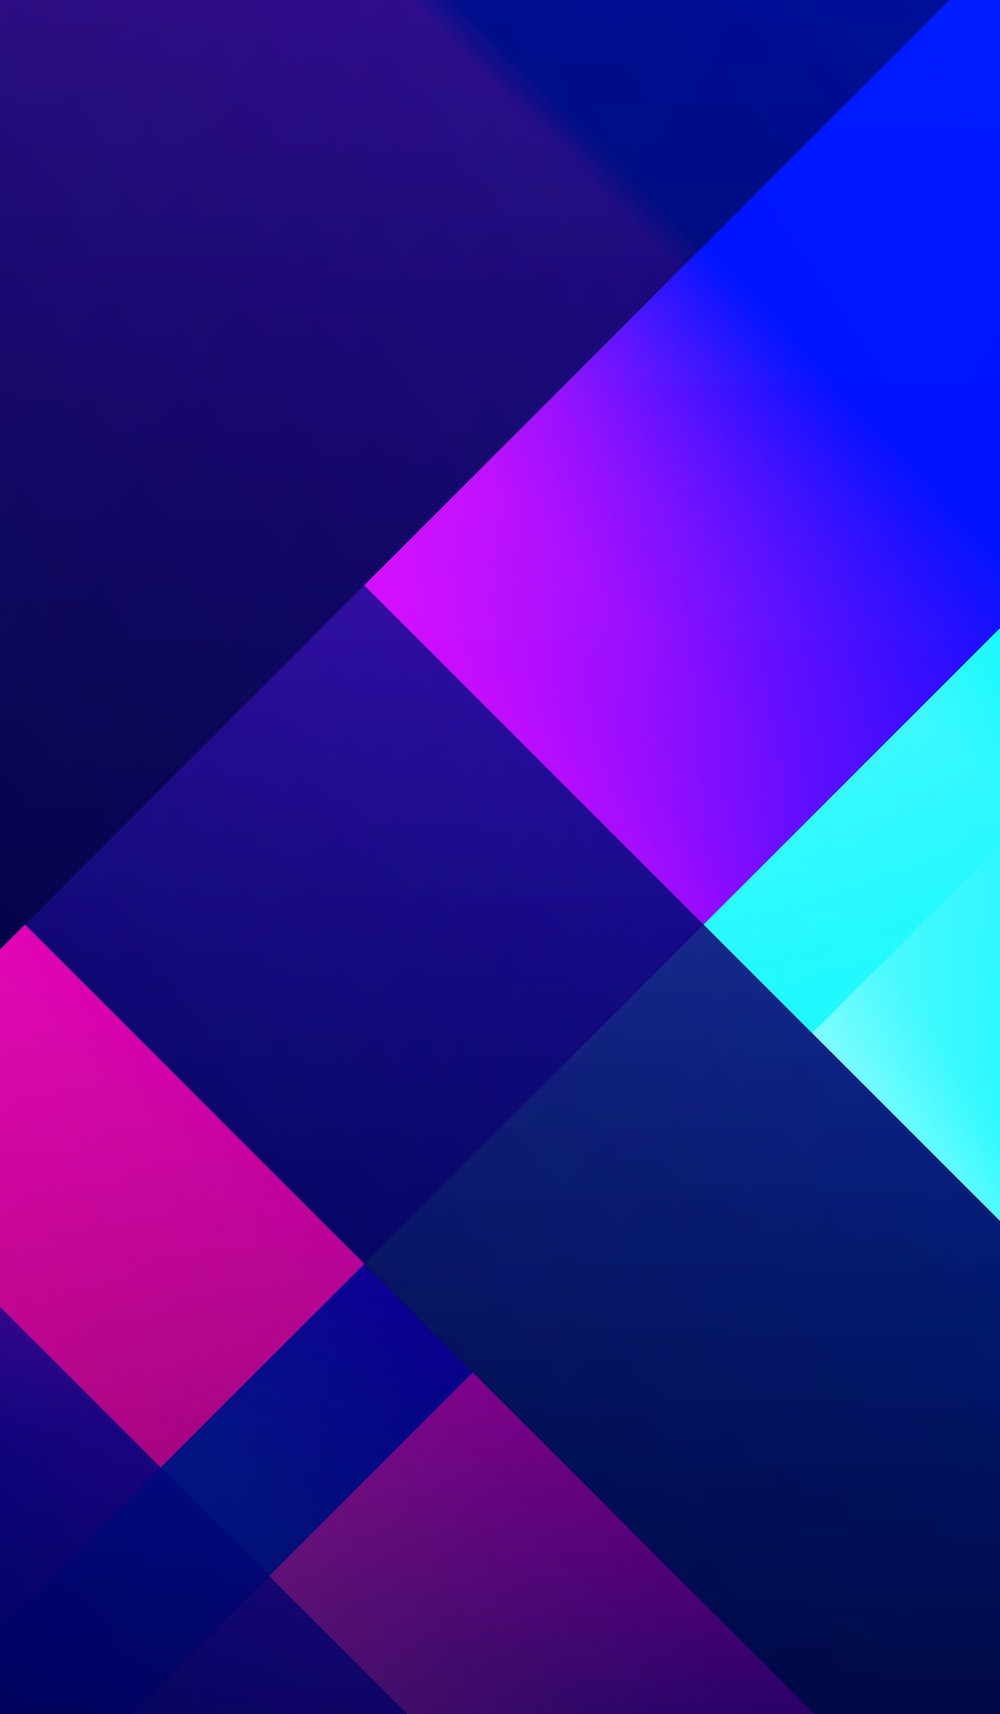 Blue And Purple Gradient Picture. Download Free Image